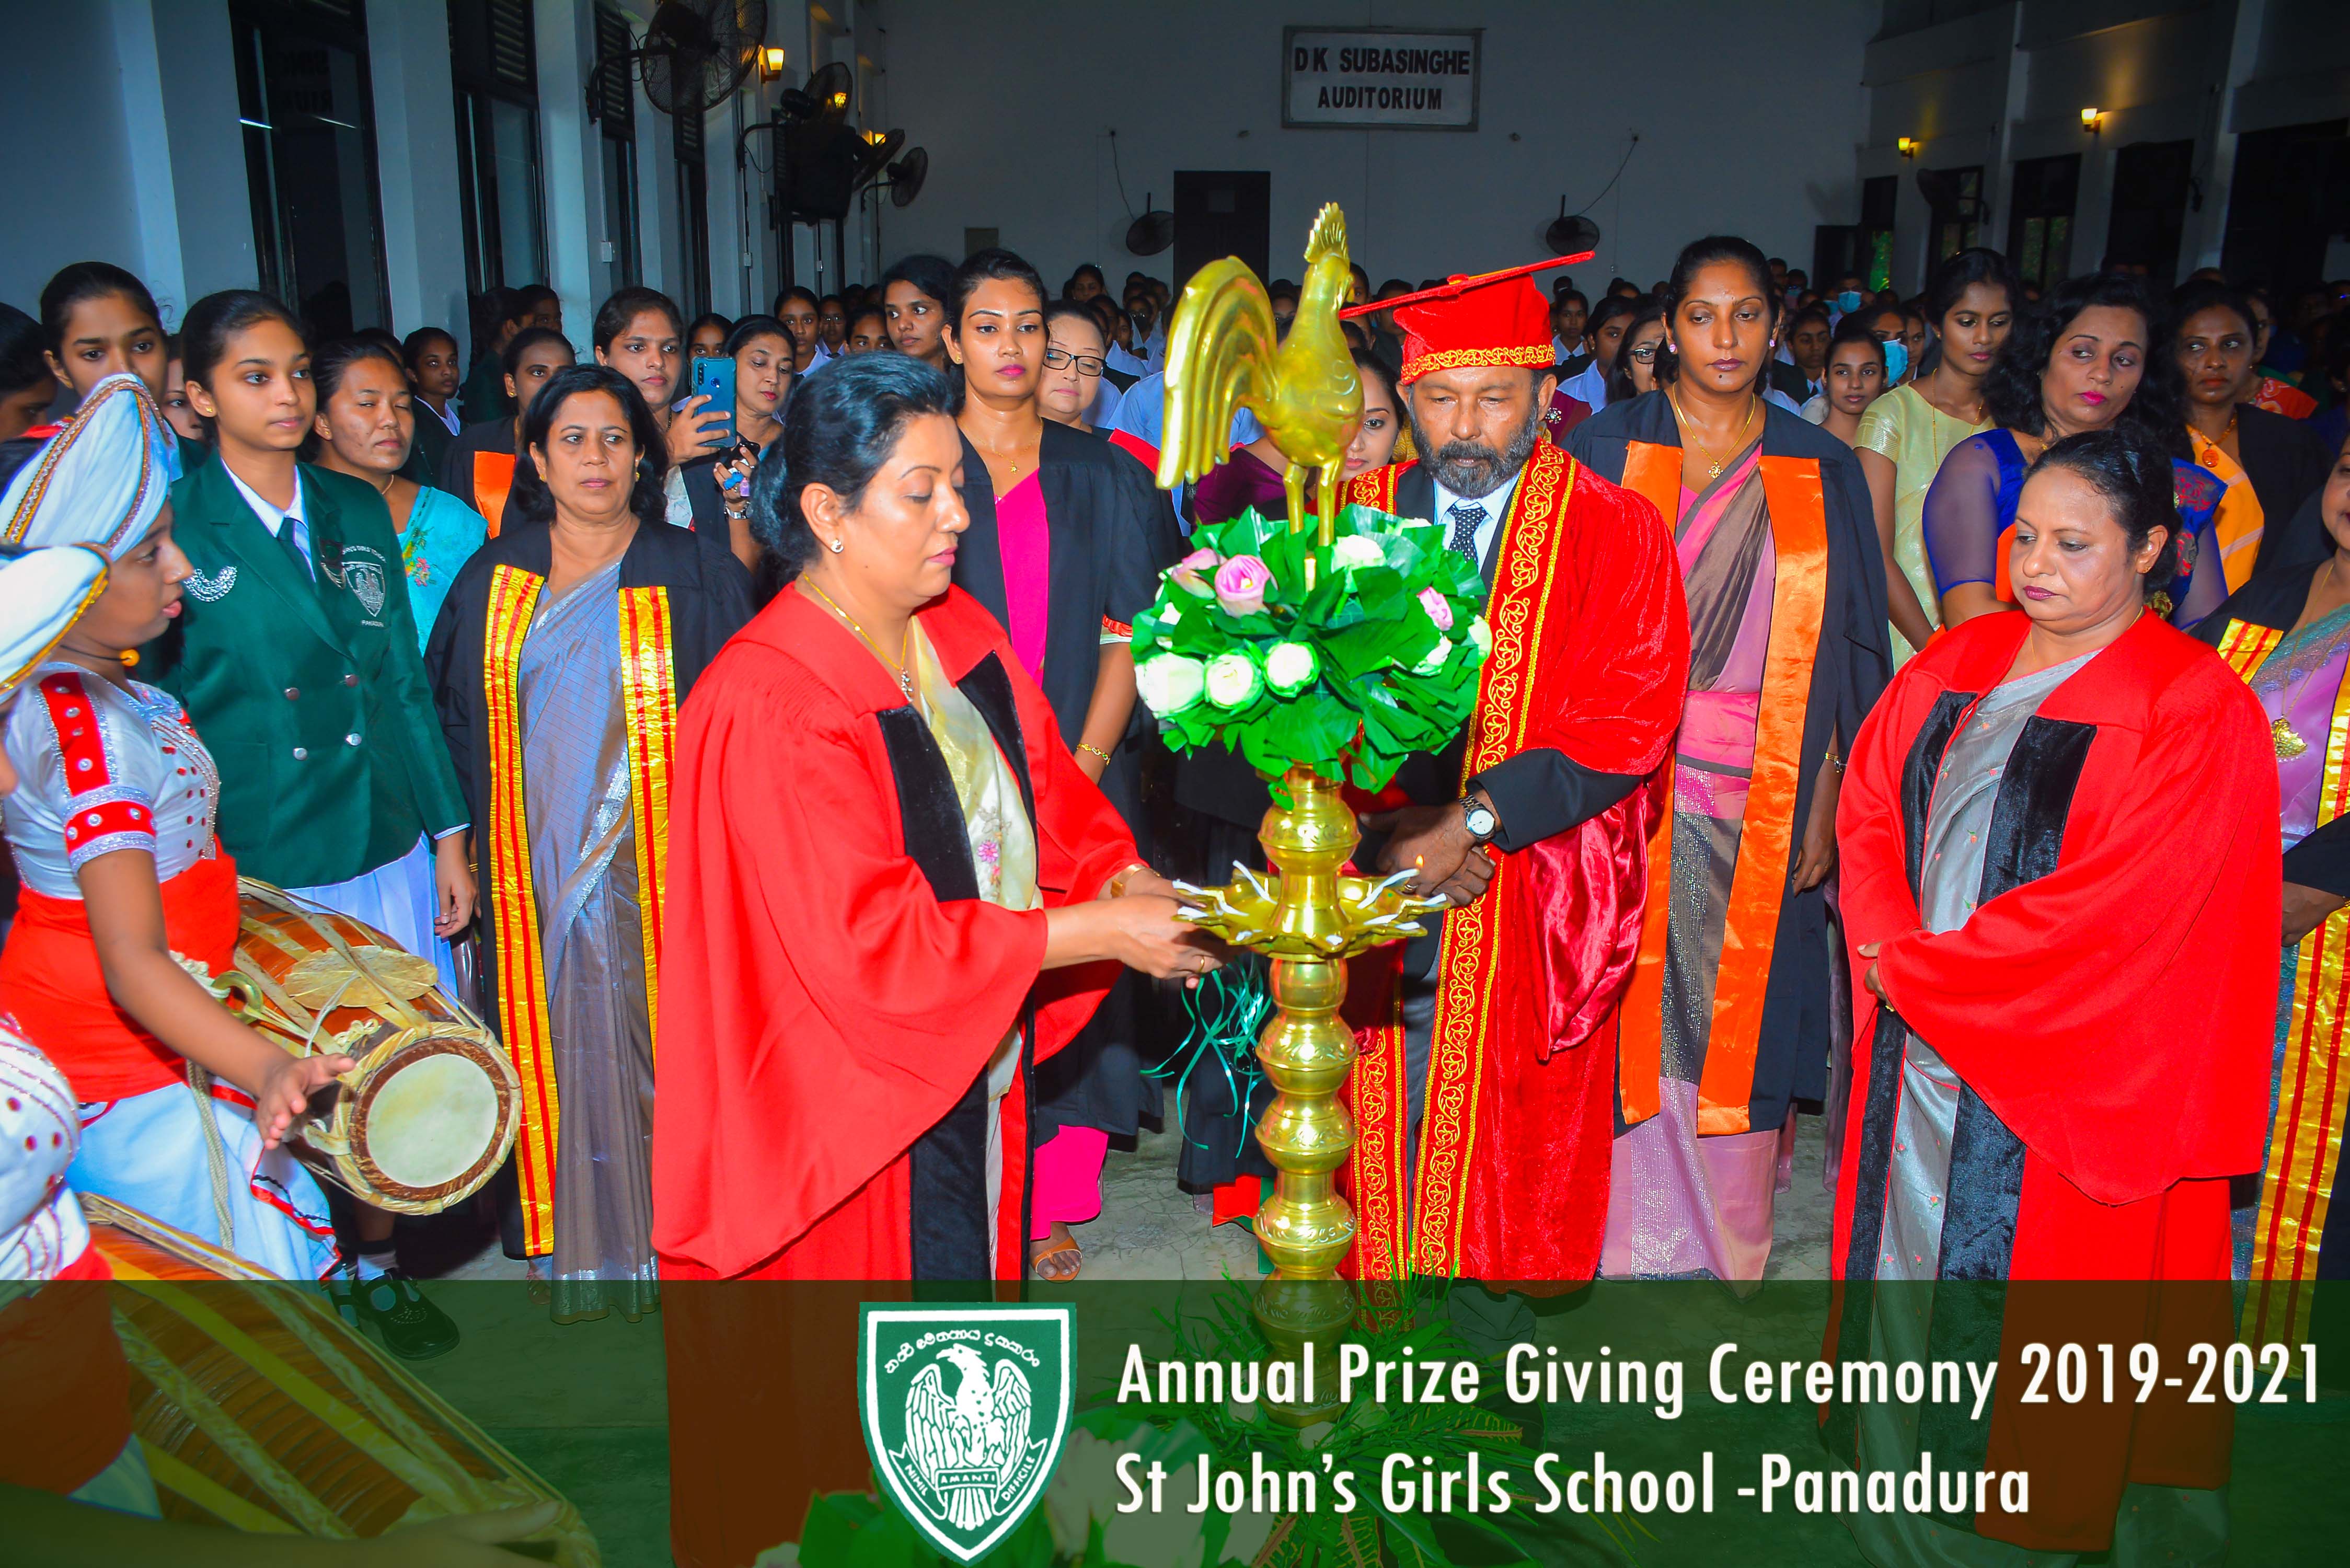 Annual Prize Giving Ceremony 2019-2021